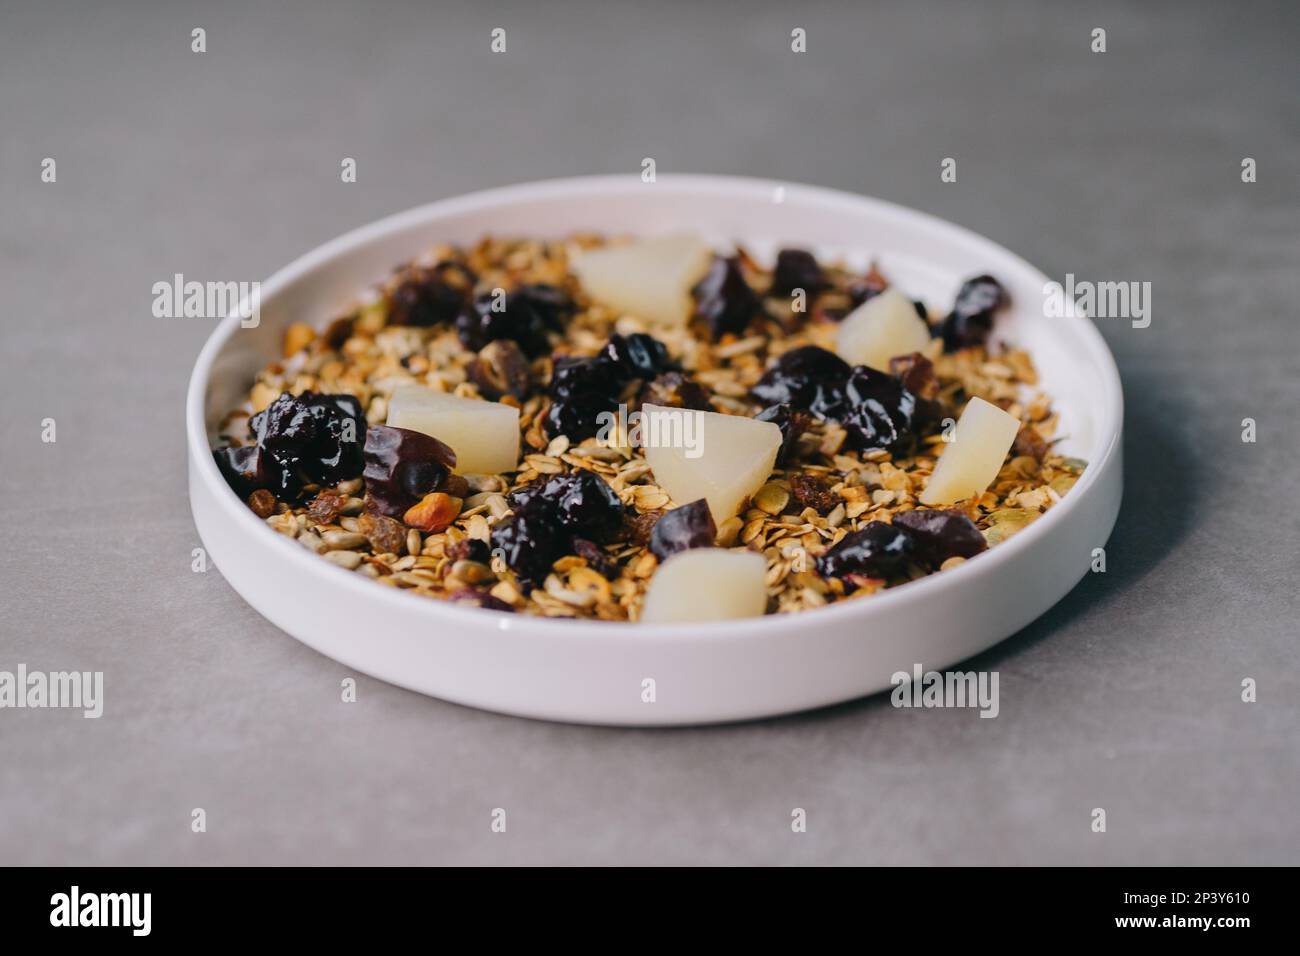 Delicious muesli on a plate in a restaurant. Stock Photo